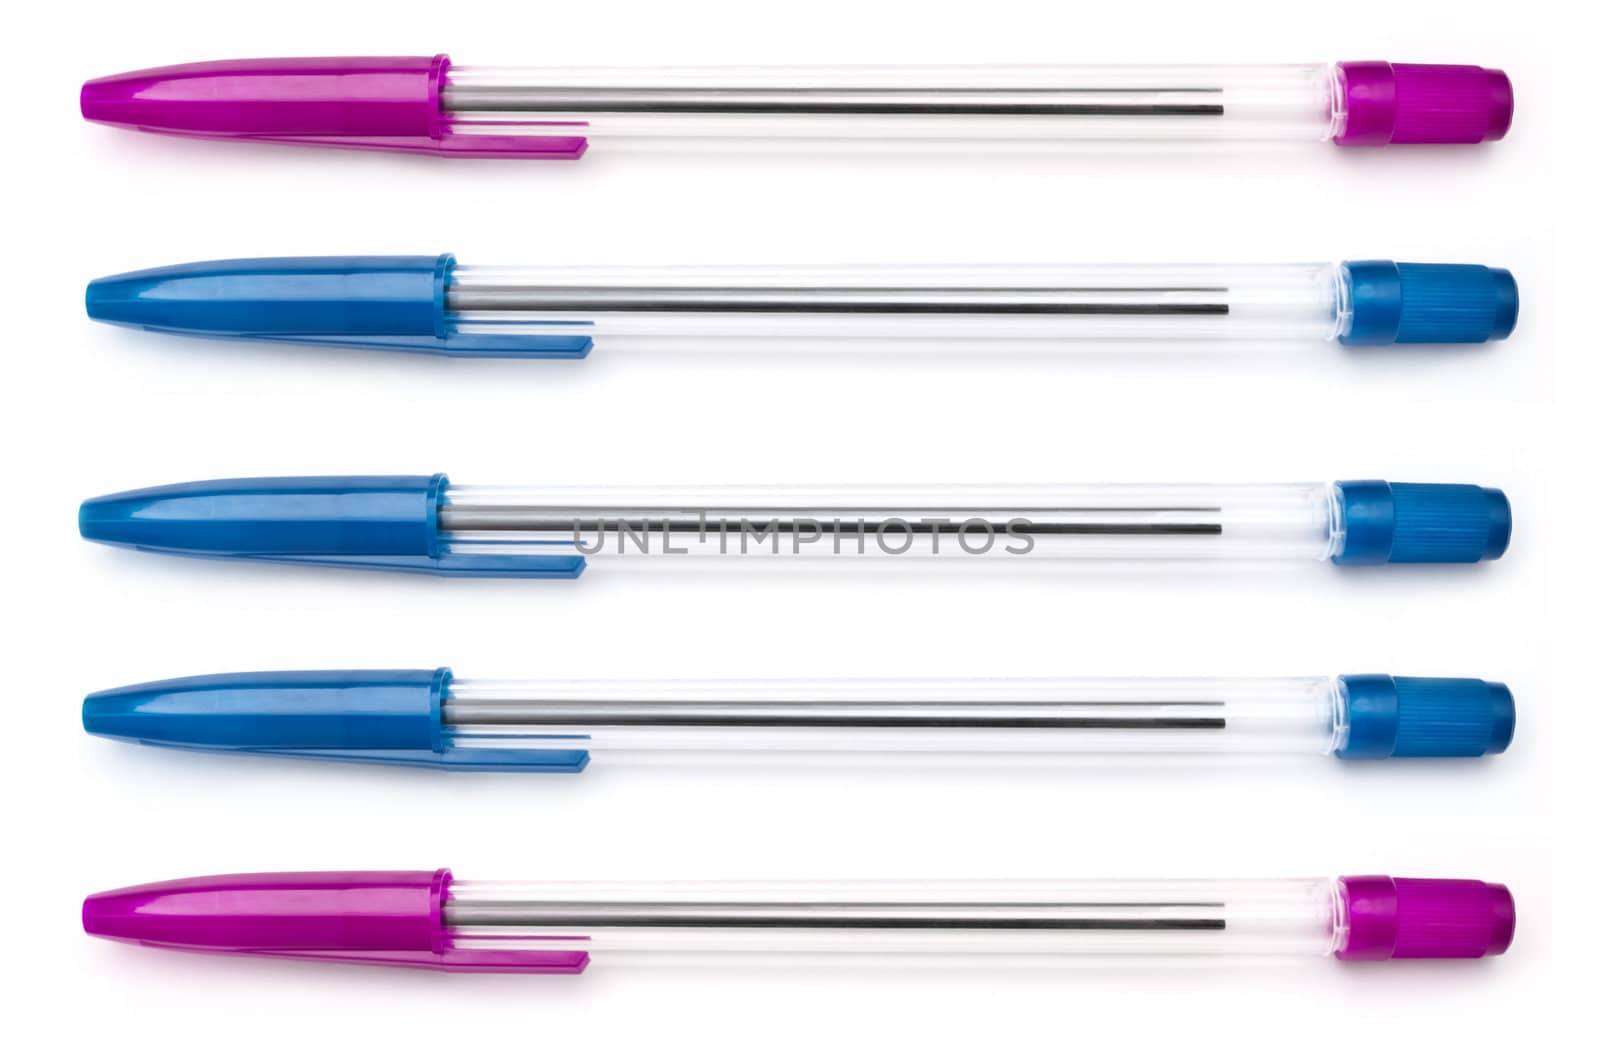 A selection of five blue and pink writing pens arranged horizontally over white